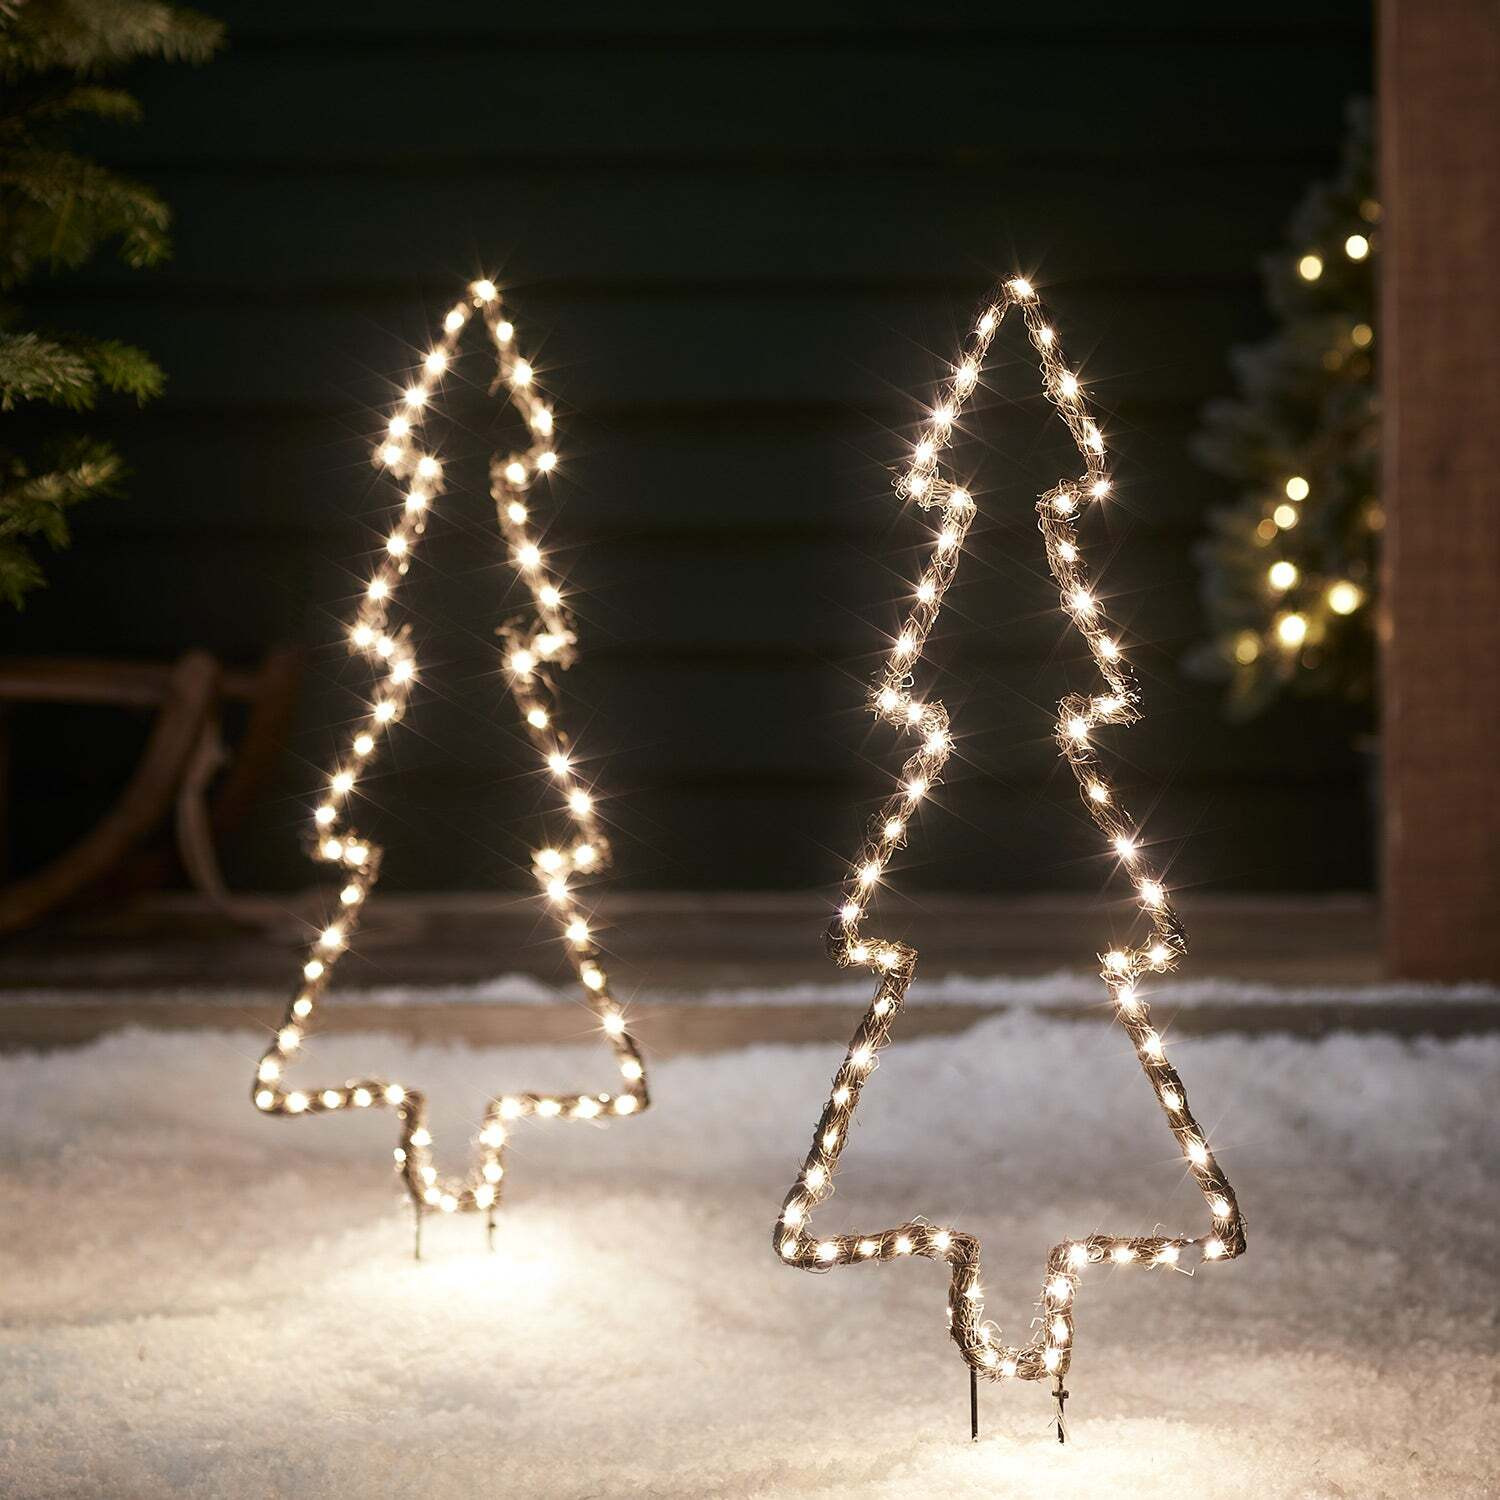 2 Willow Outdoor Christmas Tree Stake Lights - image 1